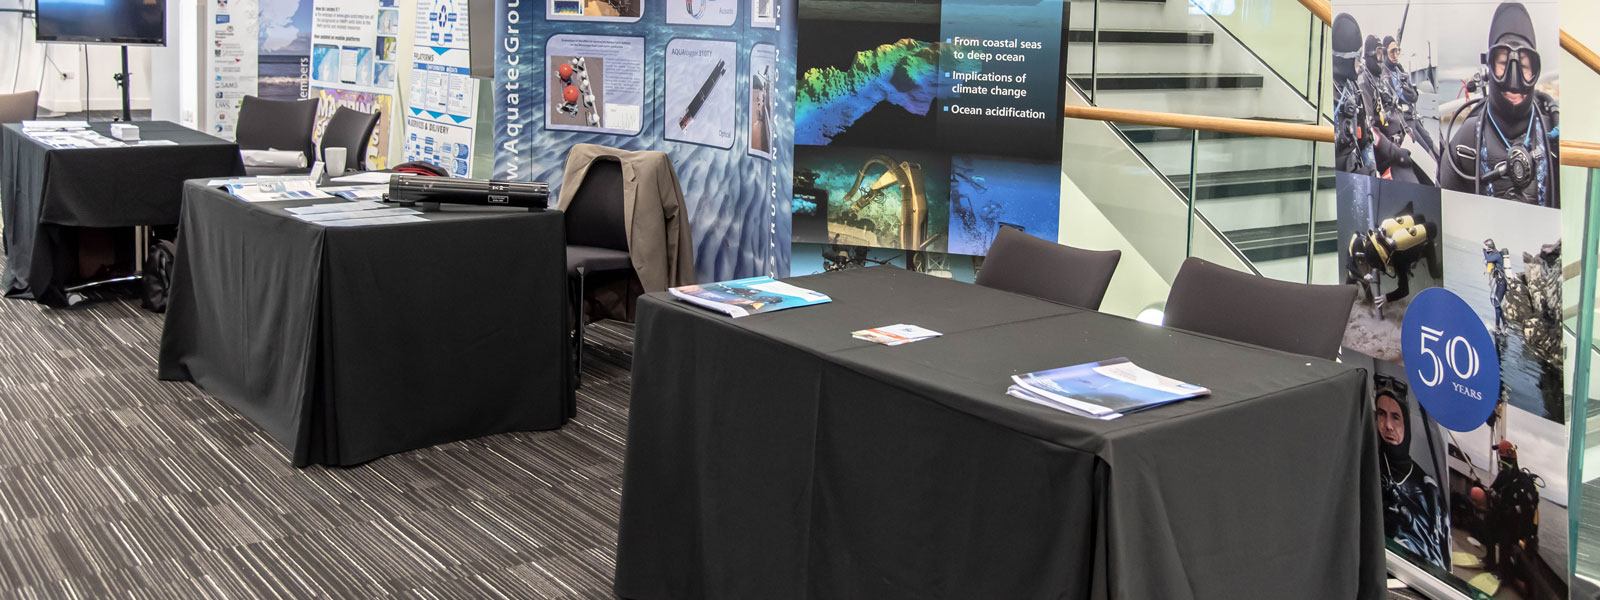 Exhibition tables set up in Level 2 Foyer in the Technology and Innovation Centre.  Photo: Lucy Knott